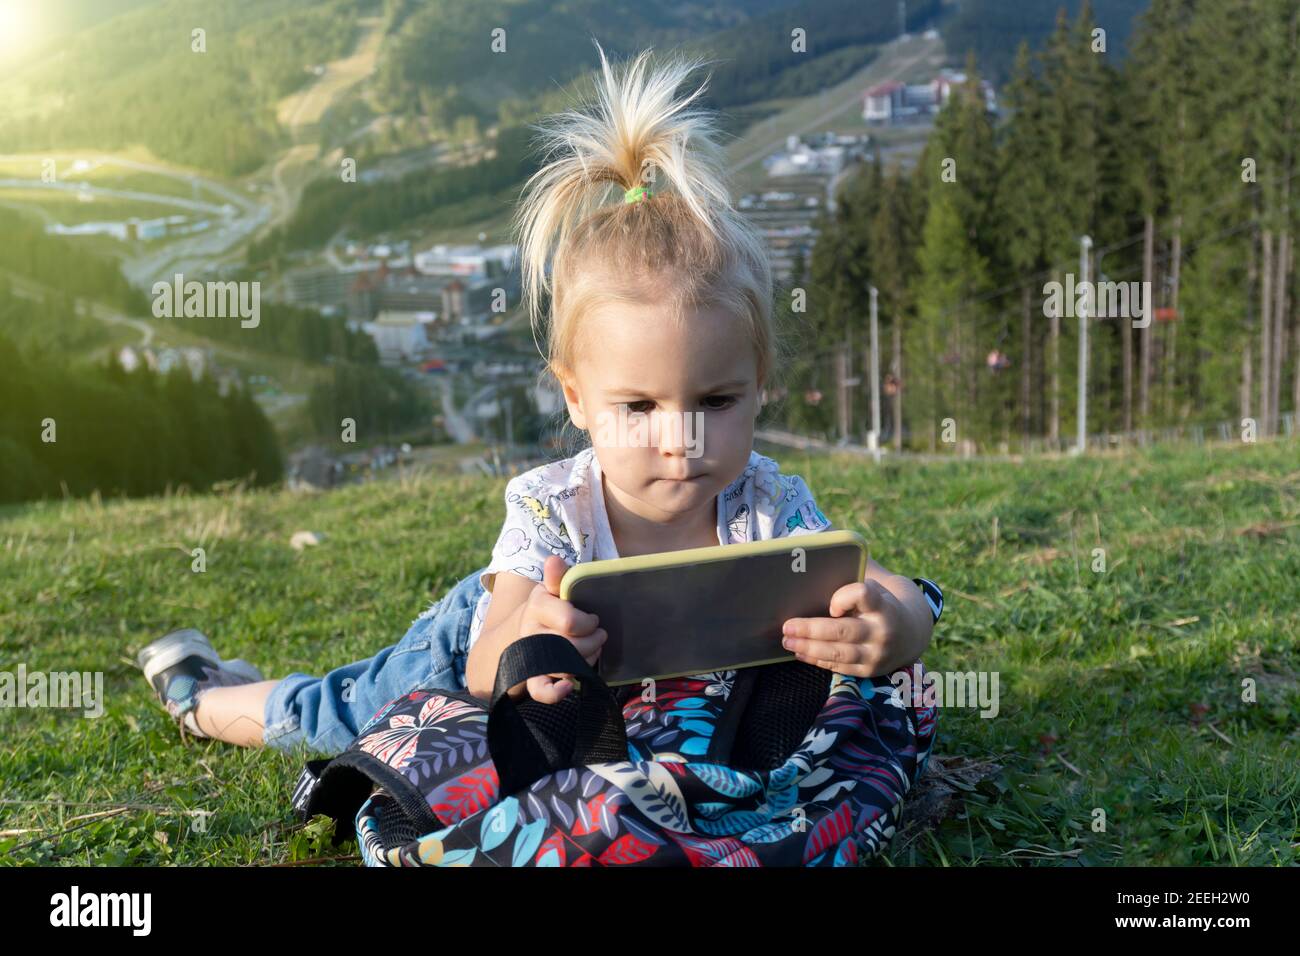 Child laying at green grass and looking at mobile phone with interested face Stock Photo